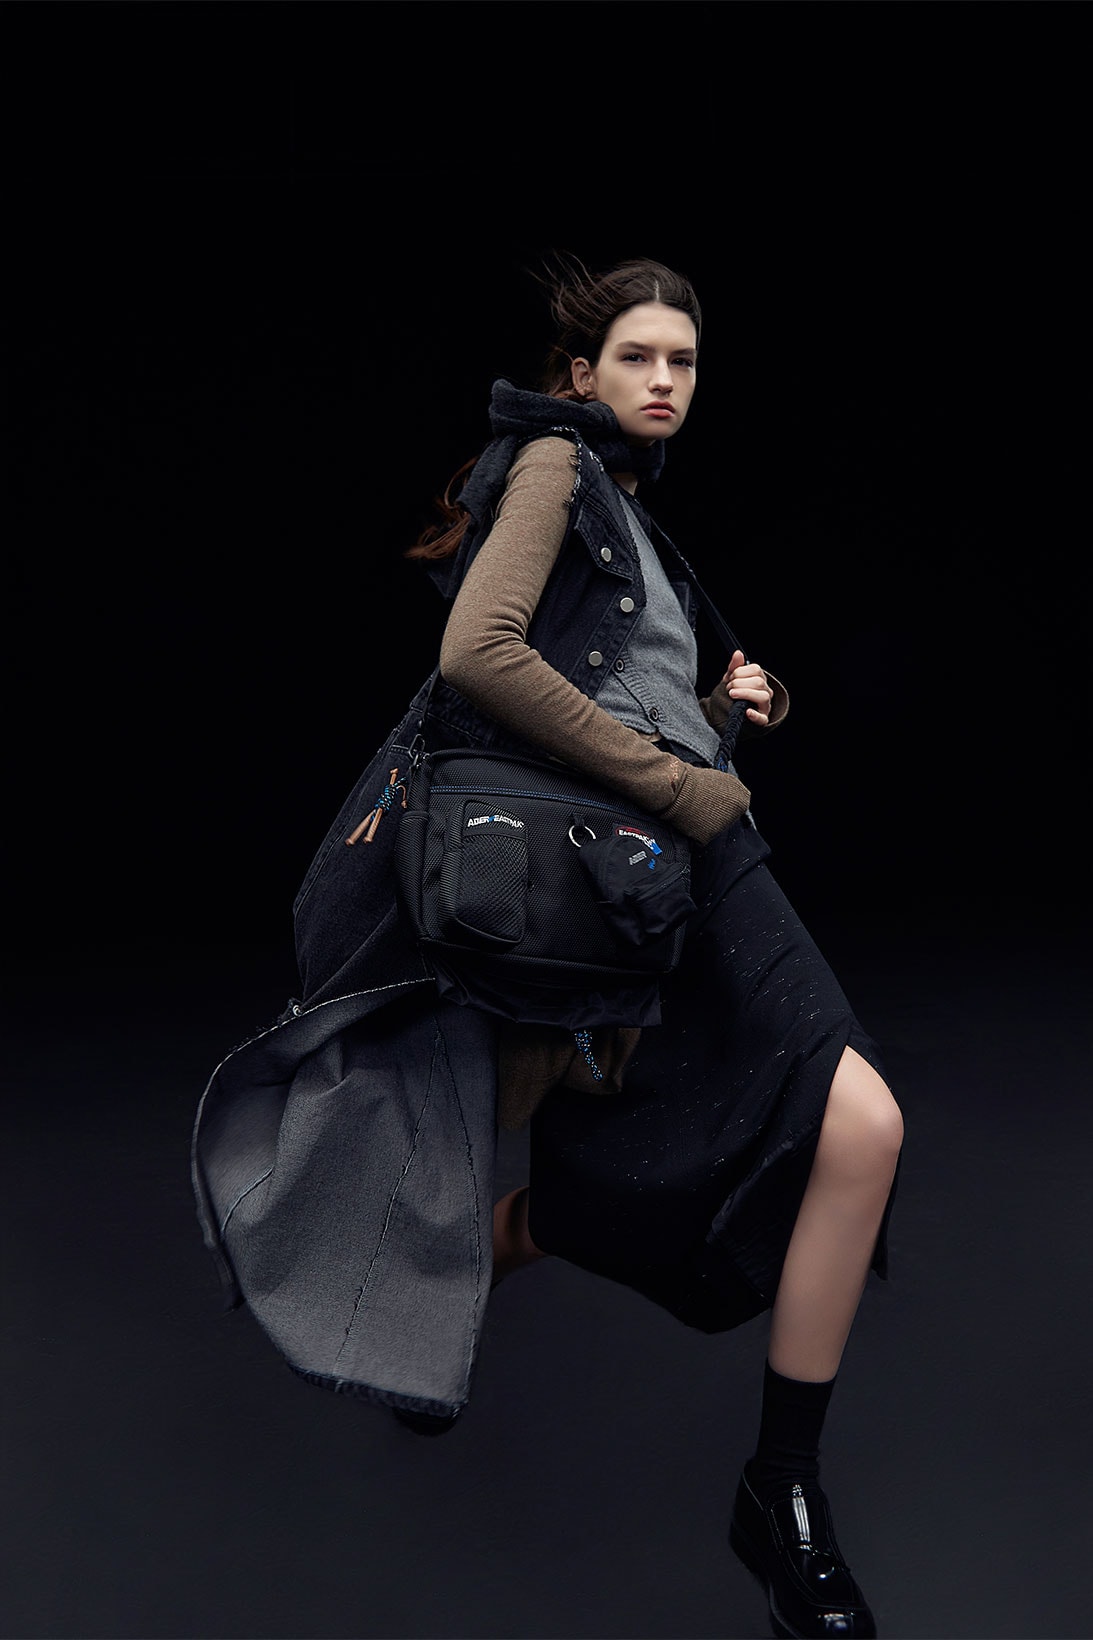 ADERERROR Eastpak Bags Backpacks Collaboration Release Where to buy